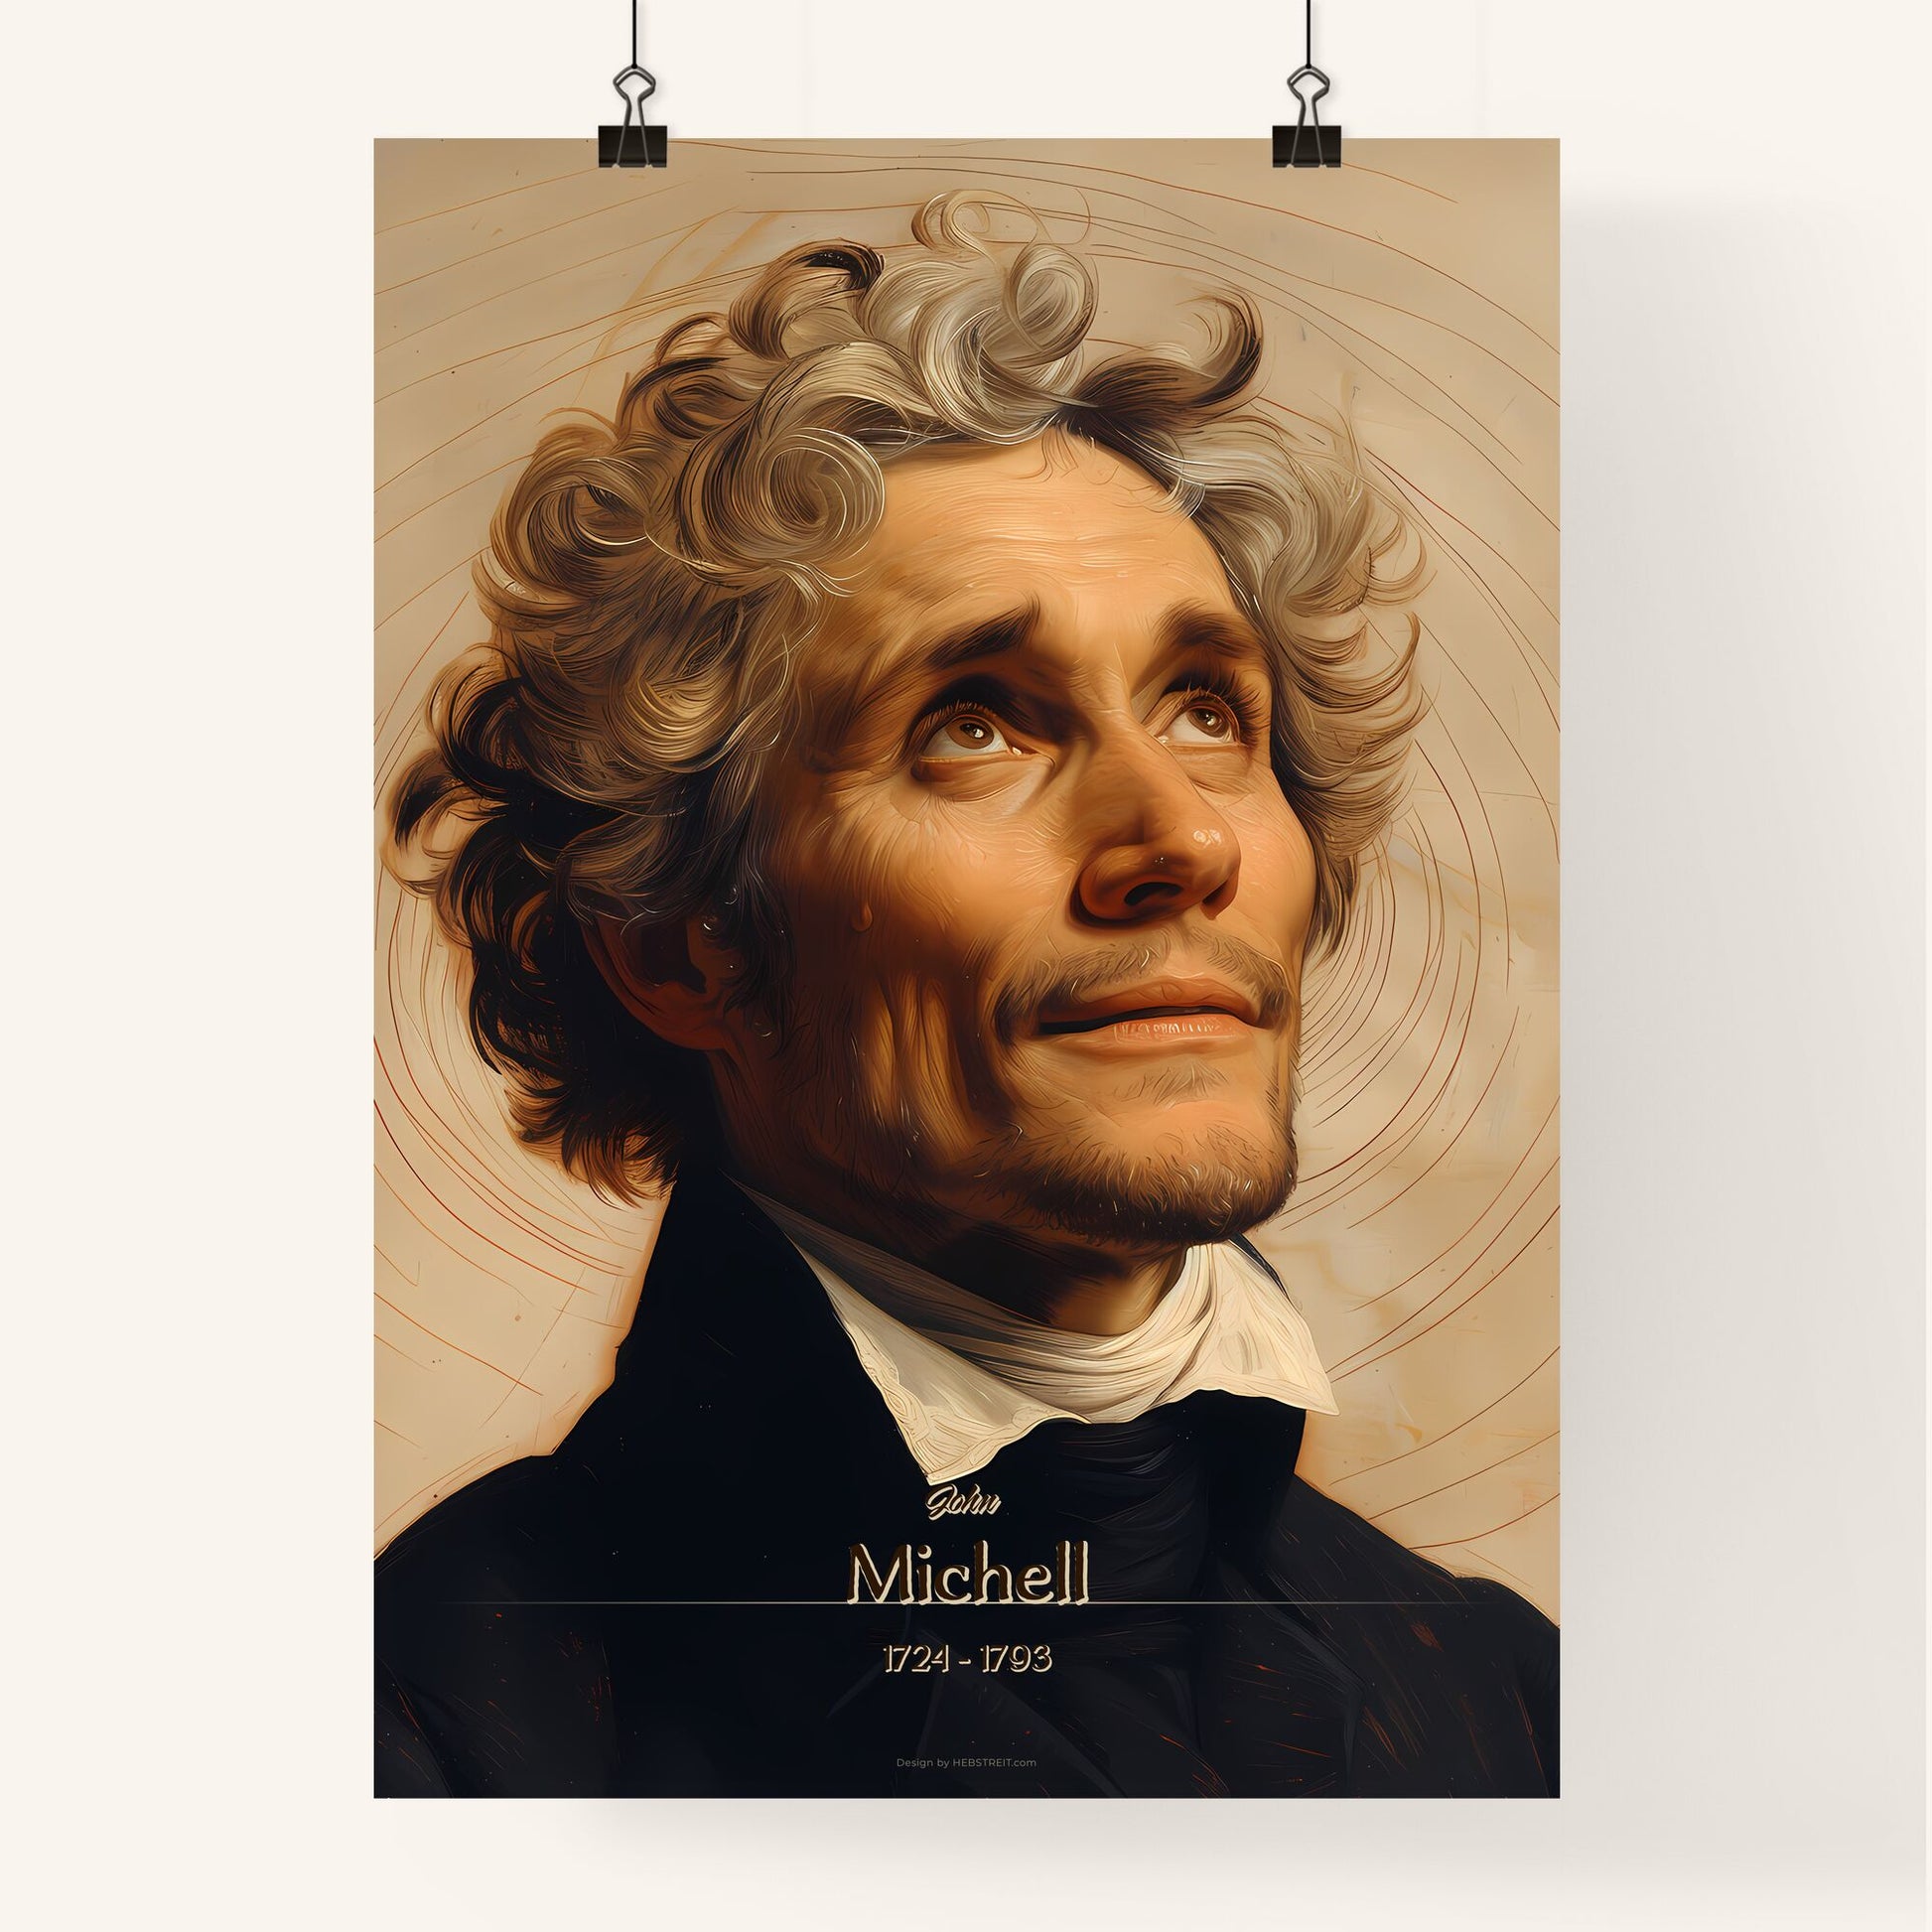 John, Michell, 1724 - 1793, A Poster of a man looking up to the sky Default Title